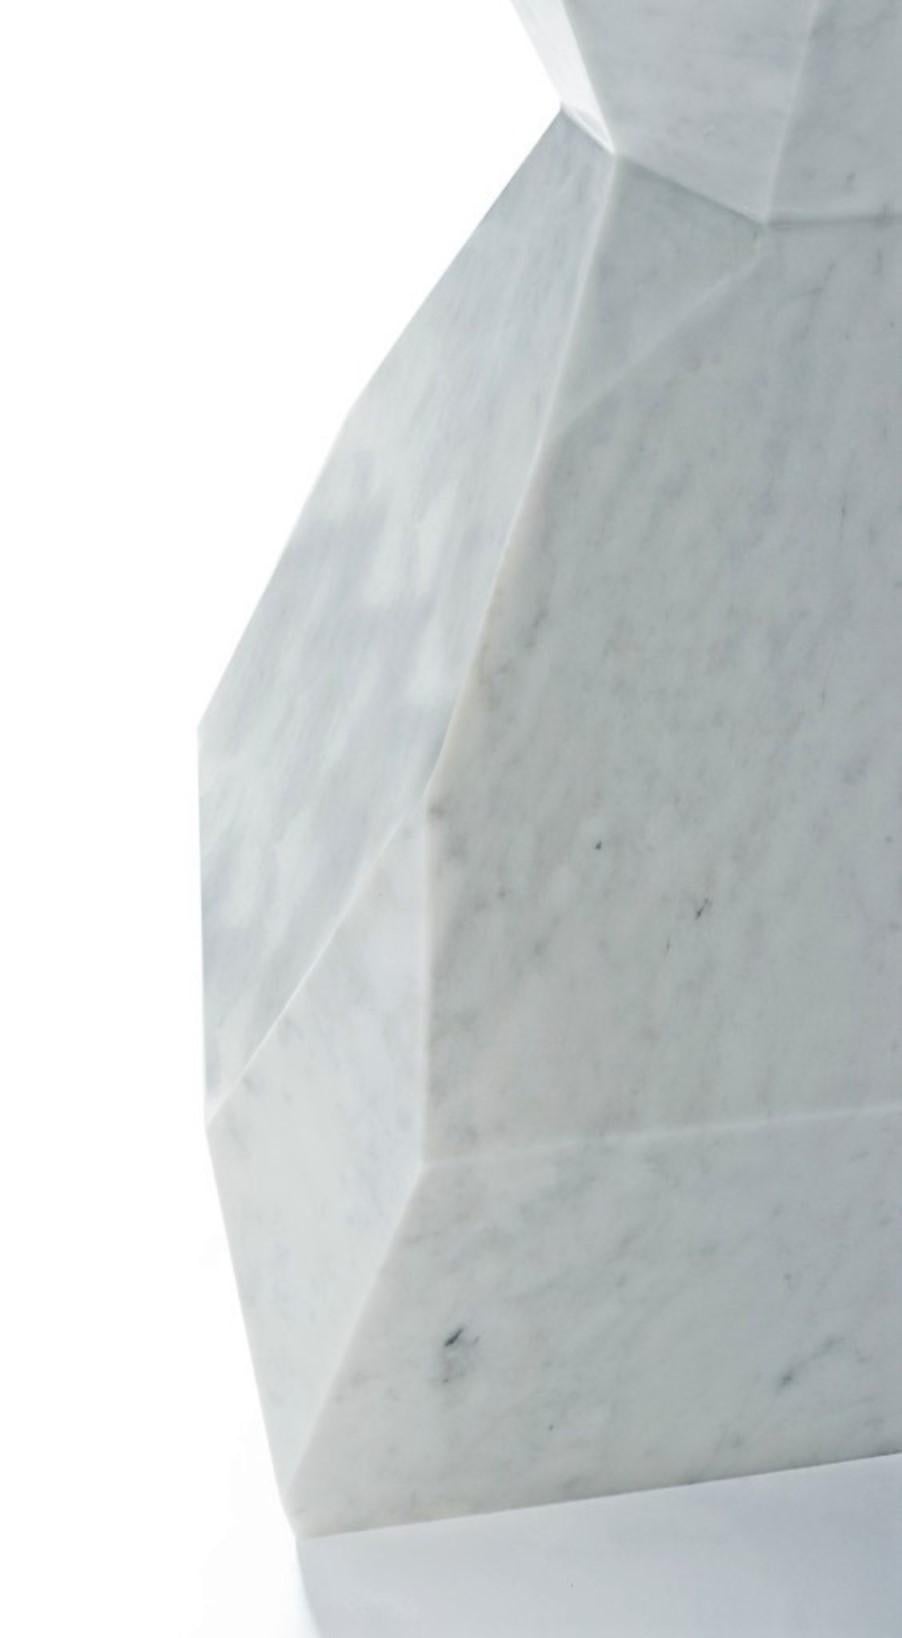 This minimalistic piece made from a single block of marble. The likeness of its faceted geometry can be found in nature in raw form.
Dimensions:
W 140 cm 55.1”
D 140 cm 55.1”
H 74 cm 29.1”
Materials as pictured:
White Carrara marble in honed